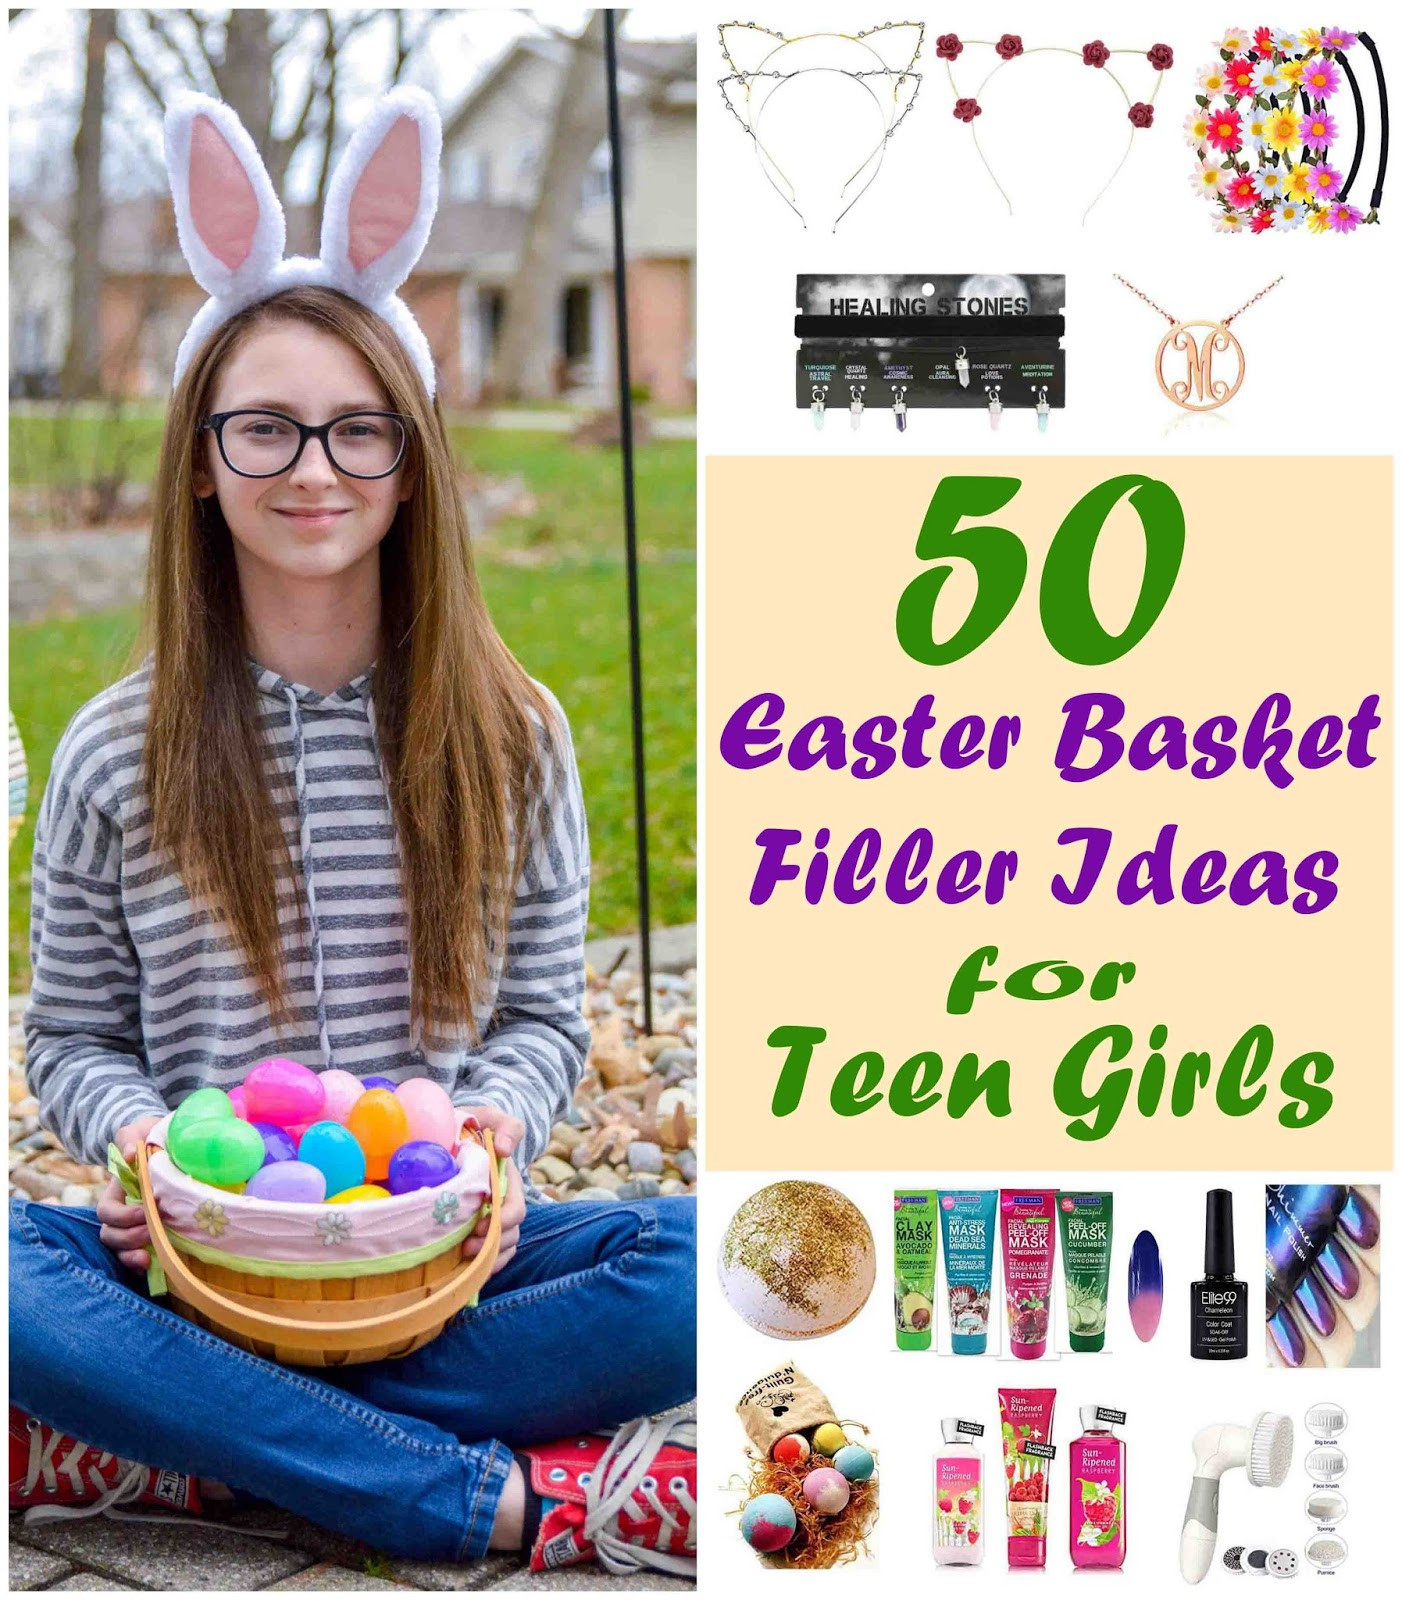 Easter Gift Ideas For Girls
 Theresa s Mixed Nuts Allison s Top 50 Easter Basket